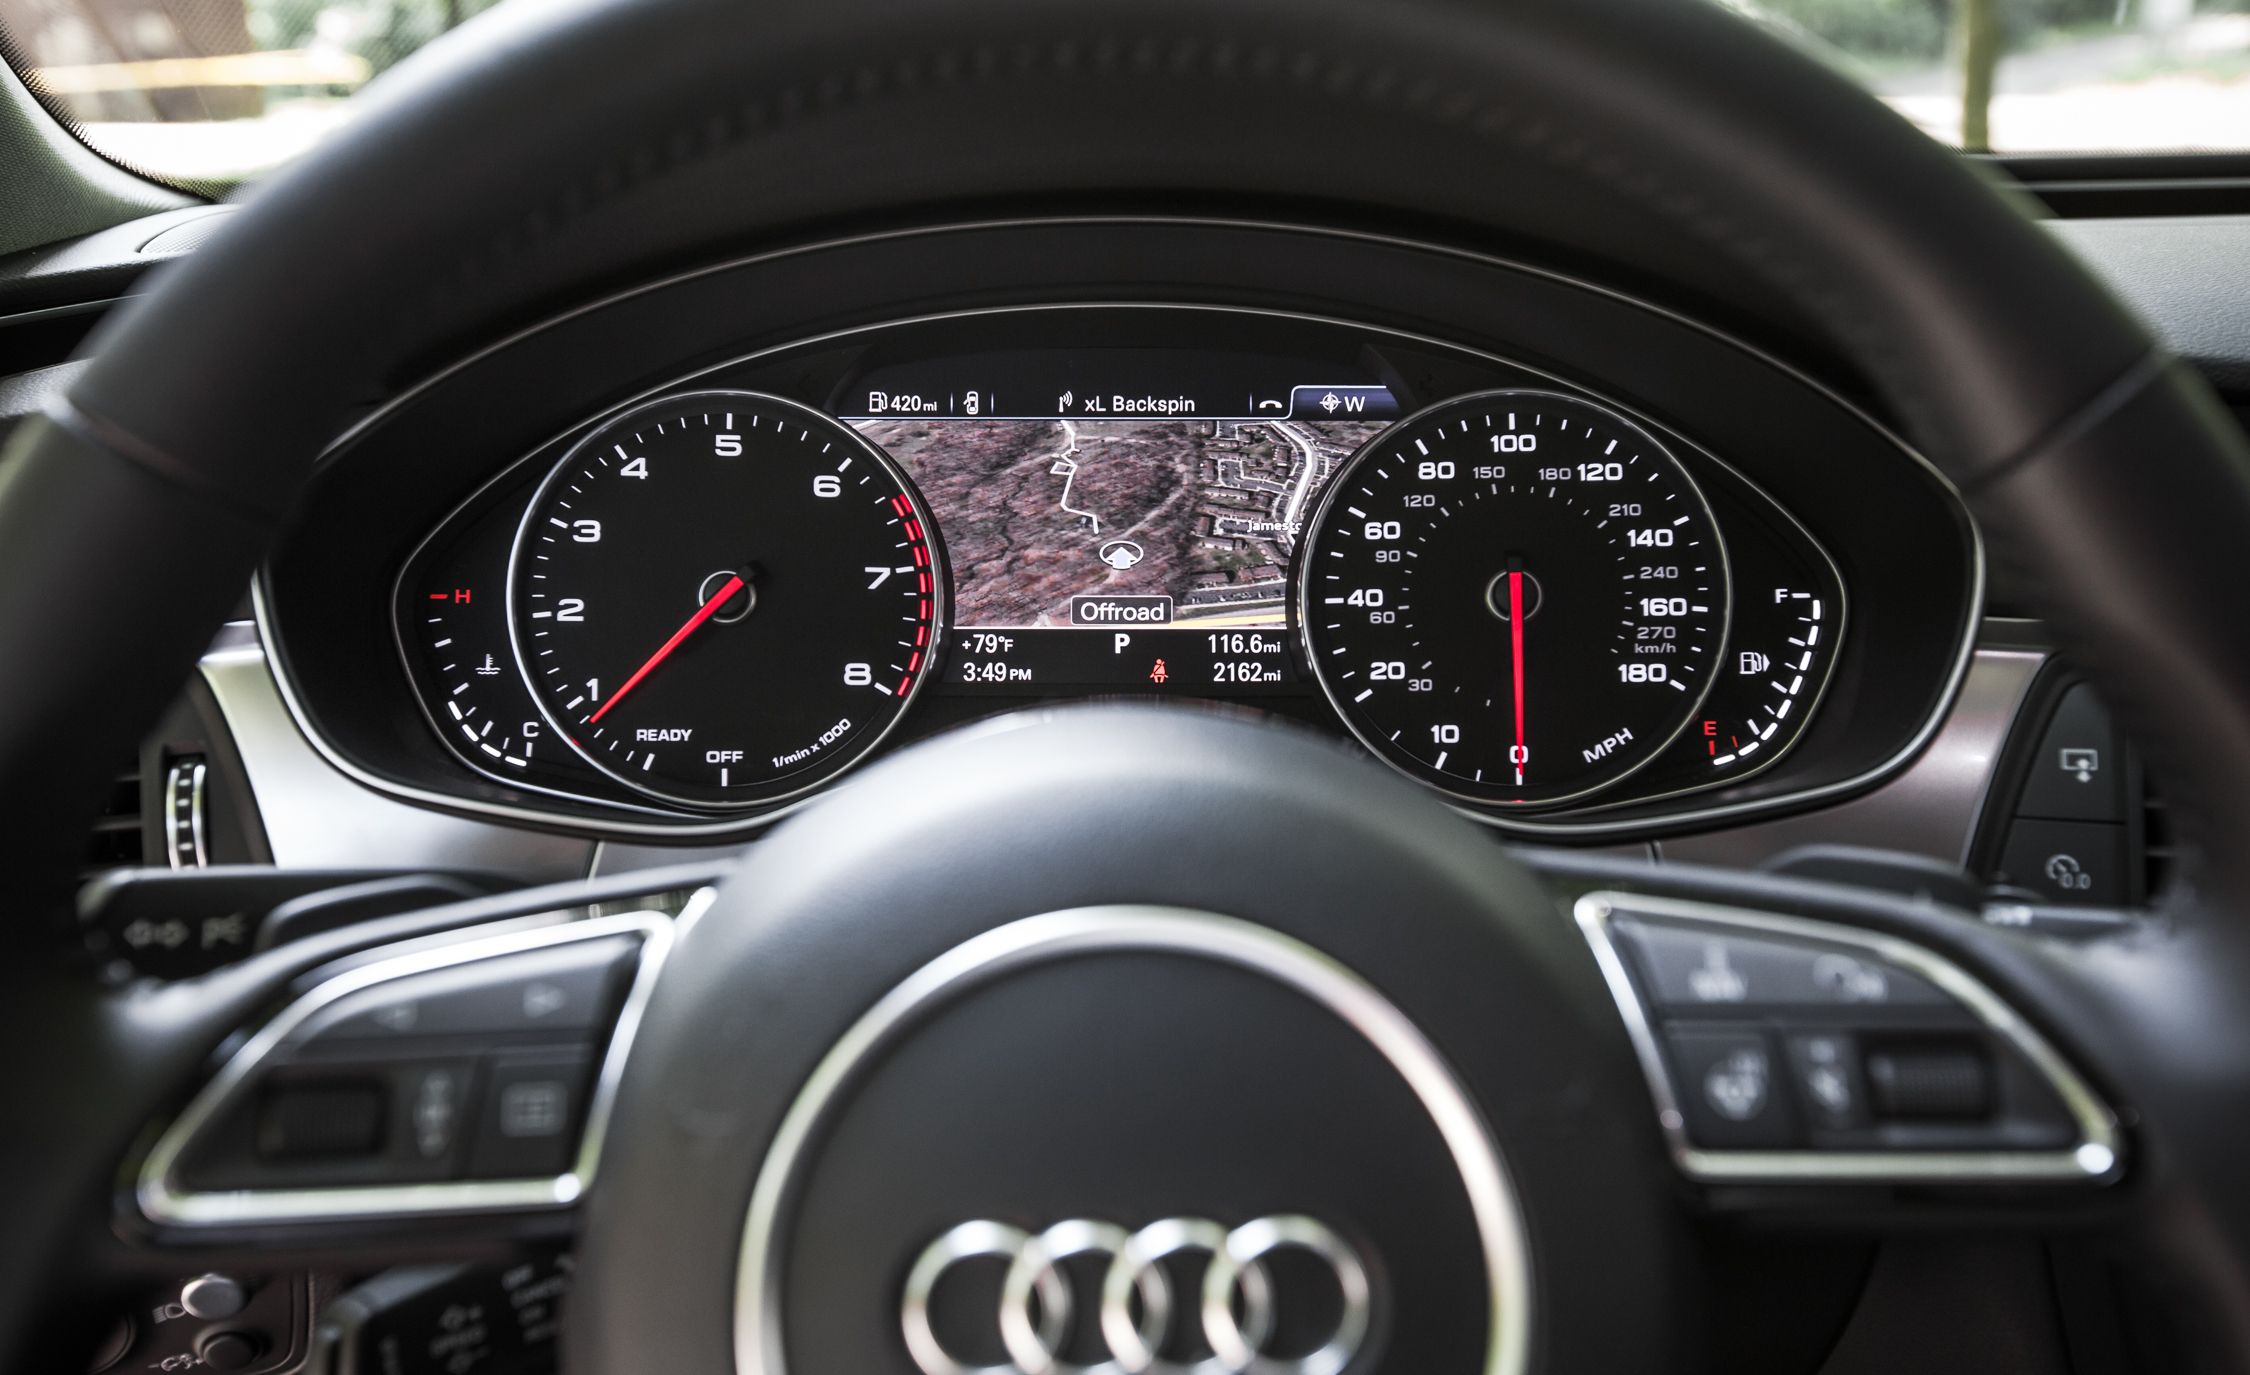 2016 Audi A7 Interior View Instrument Cluster (View 9 of 26)